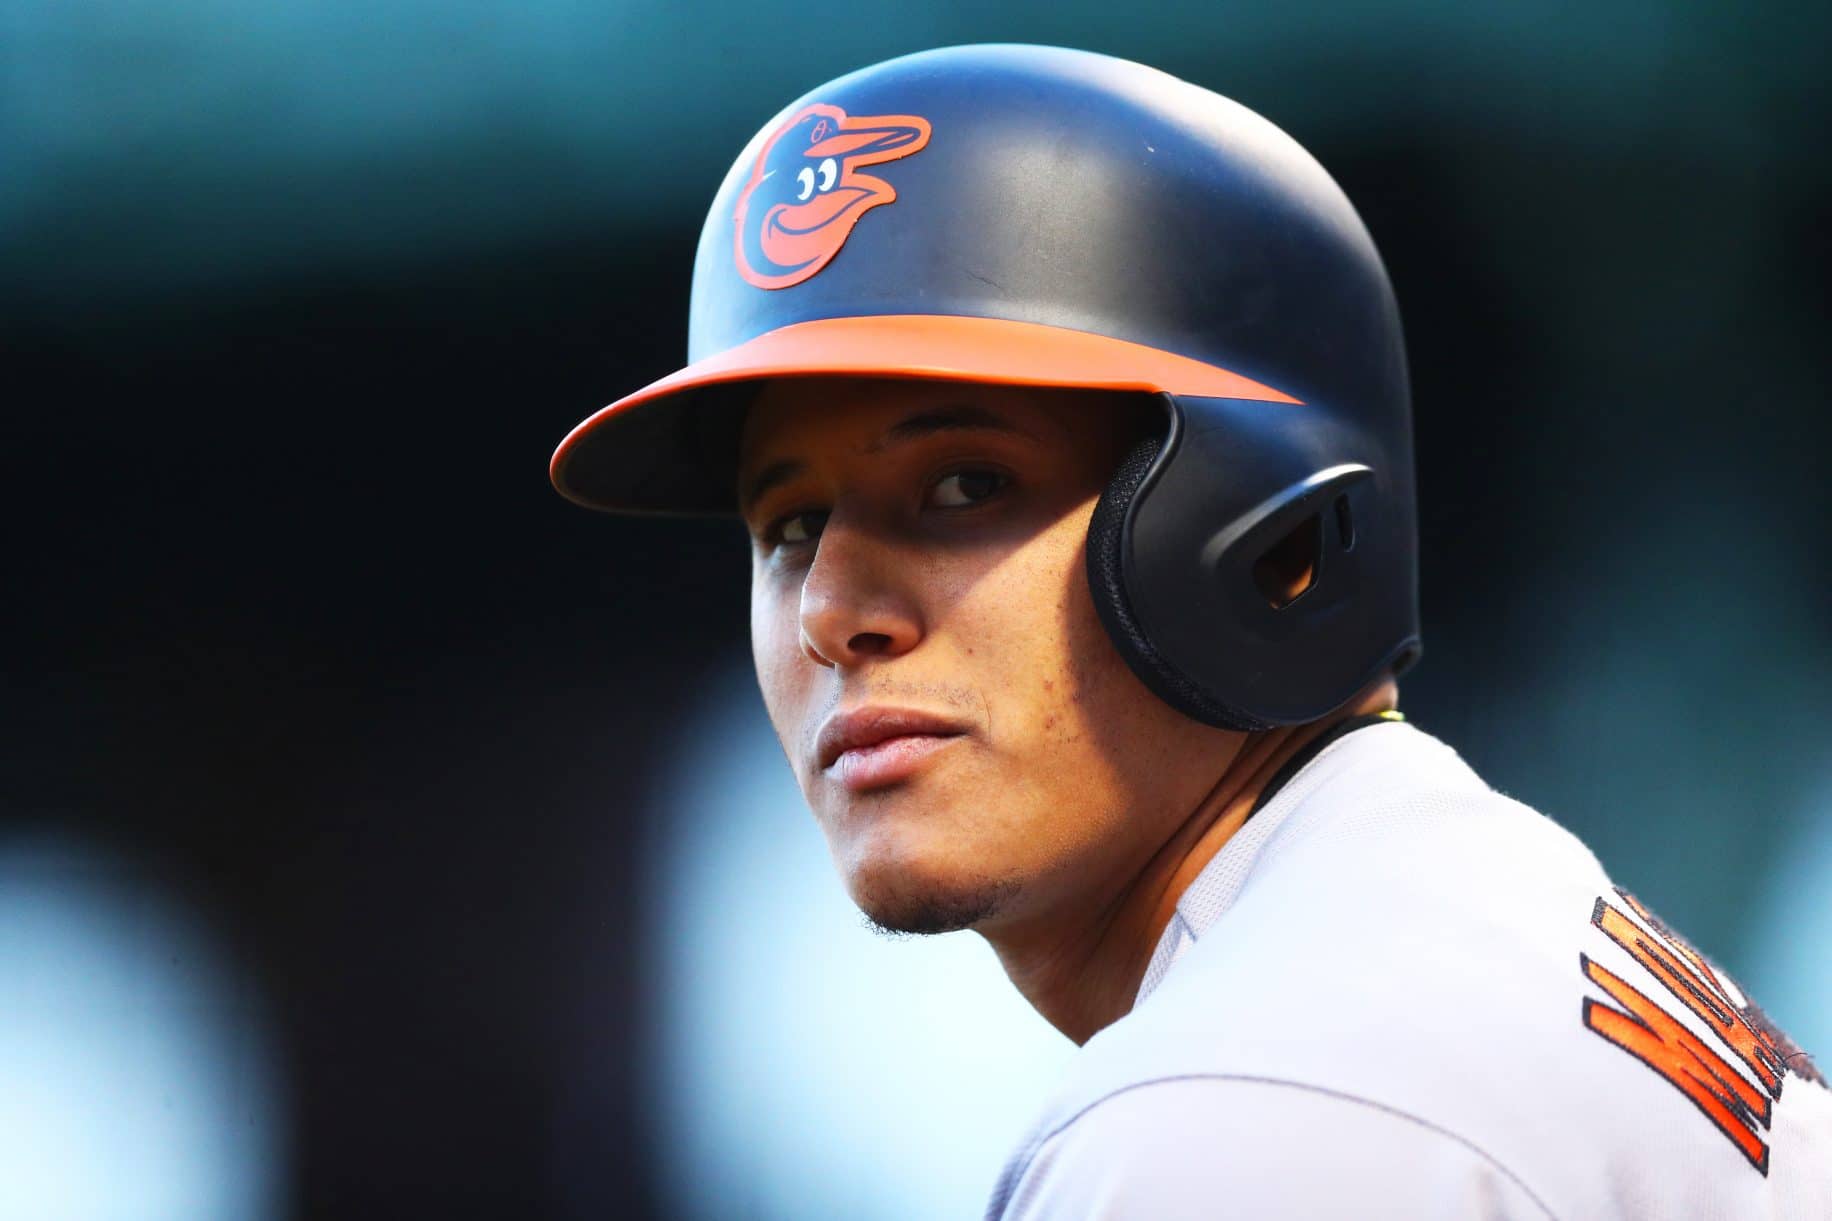 The New York Mets must consider trading for Manny Machado